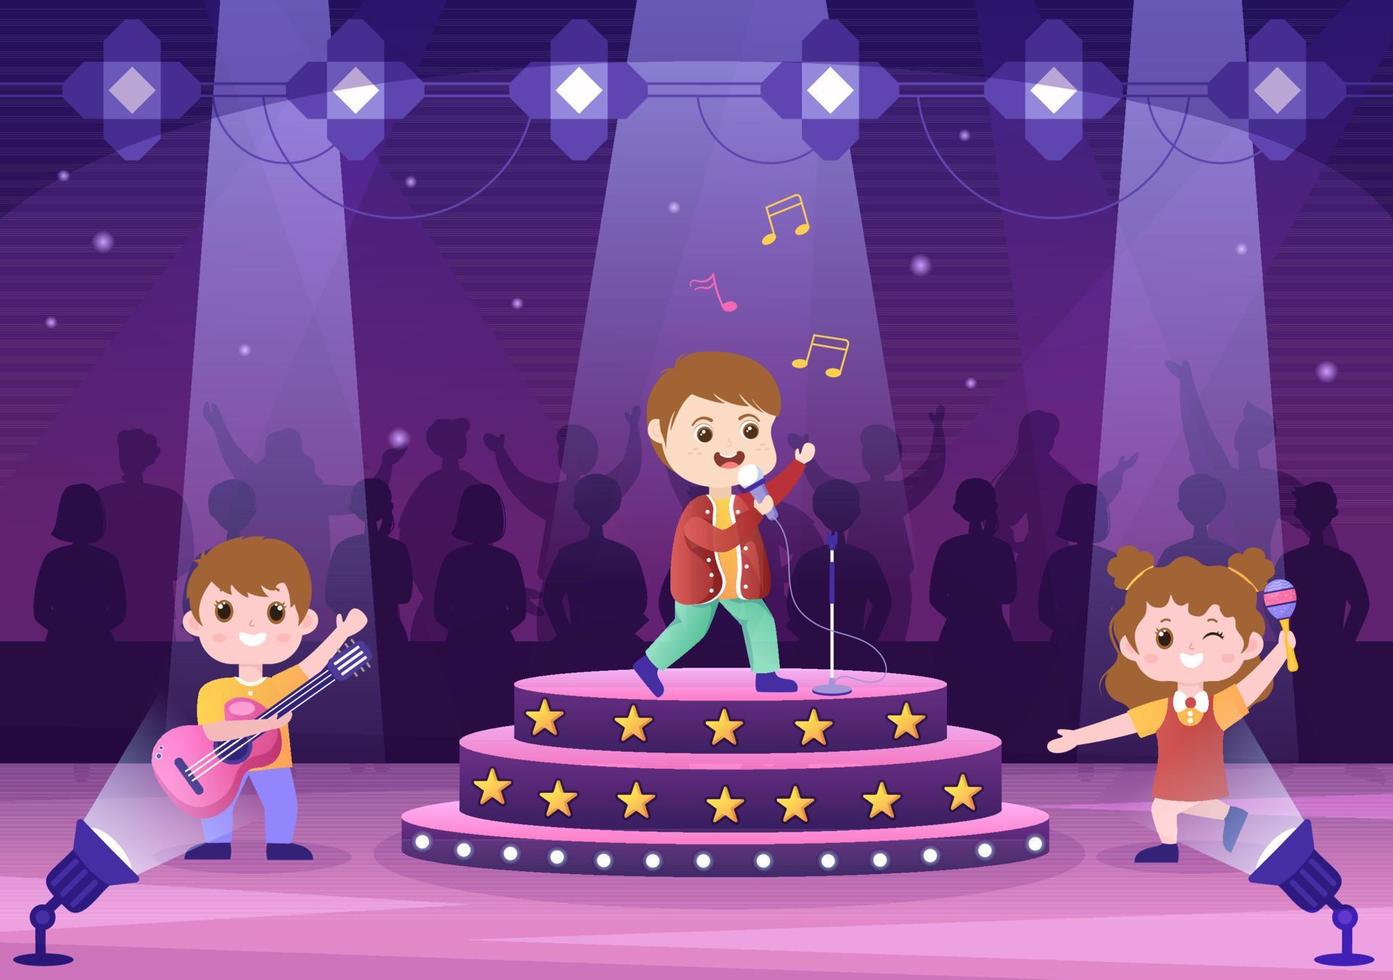 Talent Show with Contestants Displaying their Skill on Stage or Podium in Front of Judges Judging them in Cute Cartoon Illustration vector